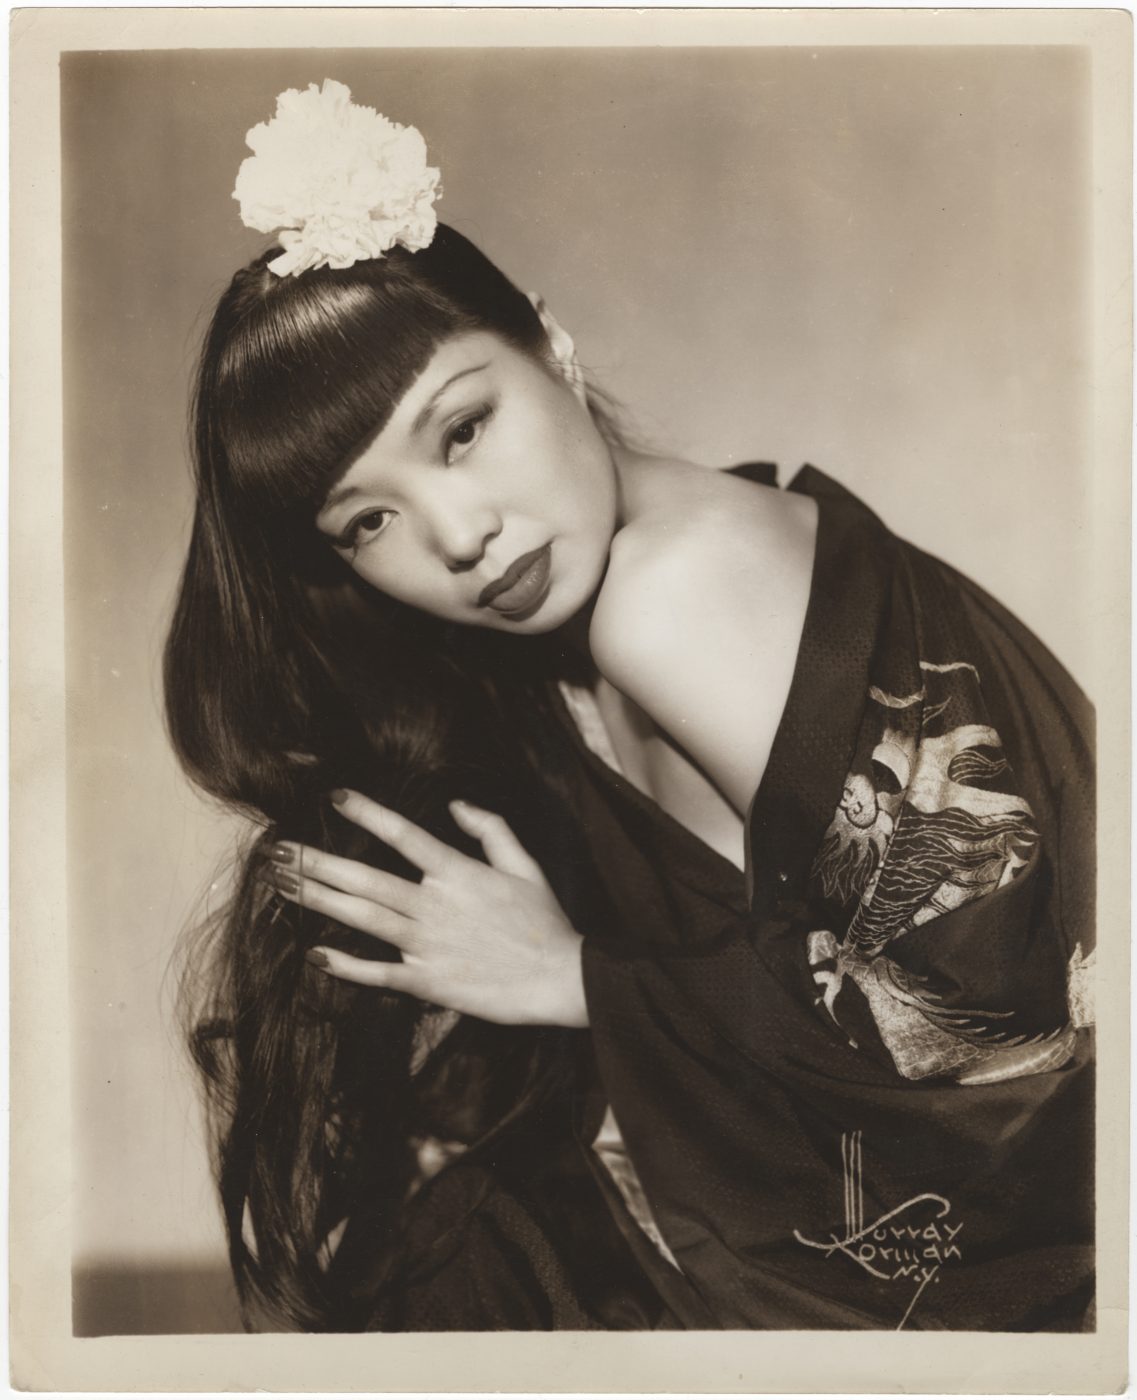 17 May 2019 Posted.
Jadin Wong at Leon & Eddi's NY in 1941, Courtesy of Wally Wong, In memory of Jadin Wong, Museum of Chinese in America (MOCA) Collection.
1941年黄美玉（Jadin Wong）在纽约Leon & Eddi's夜总会，Wally Wong捐赠，纪念Jadin Wong，美国华人博物馆（MOCA）馆藏